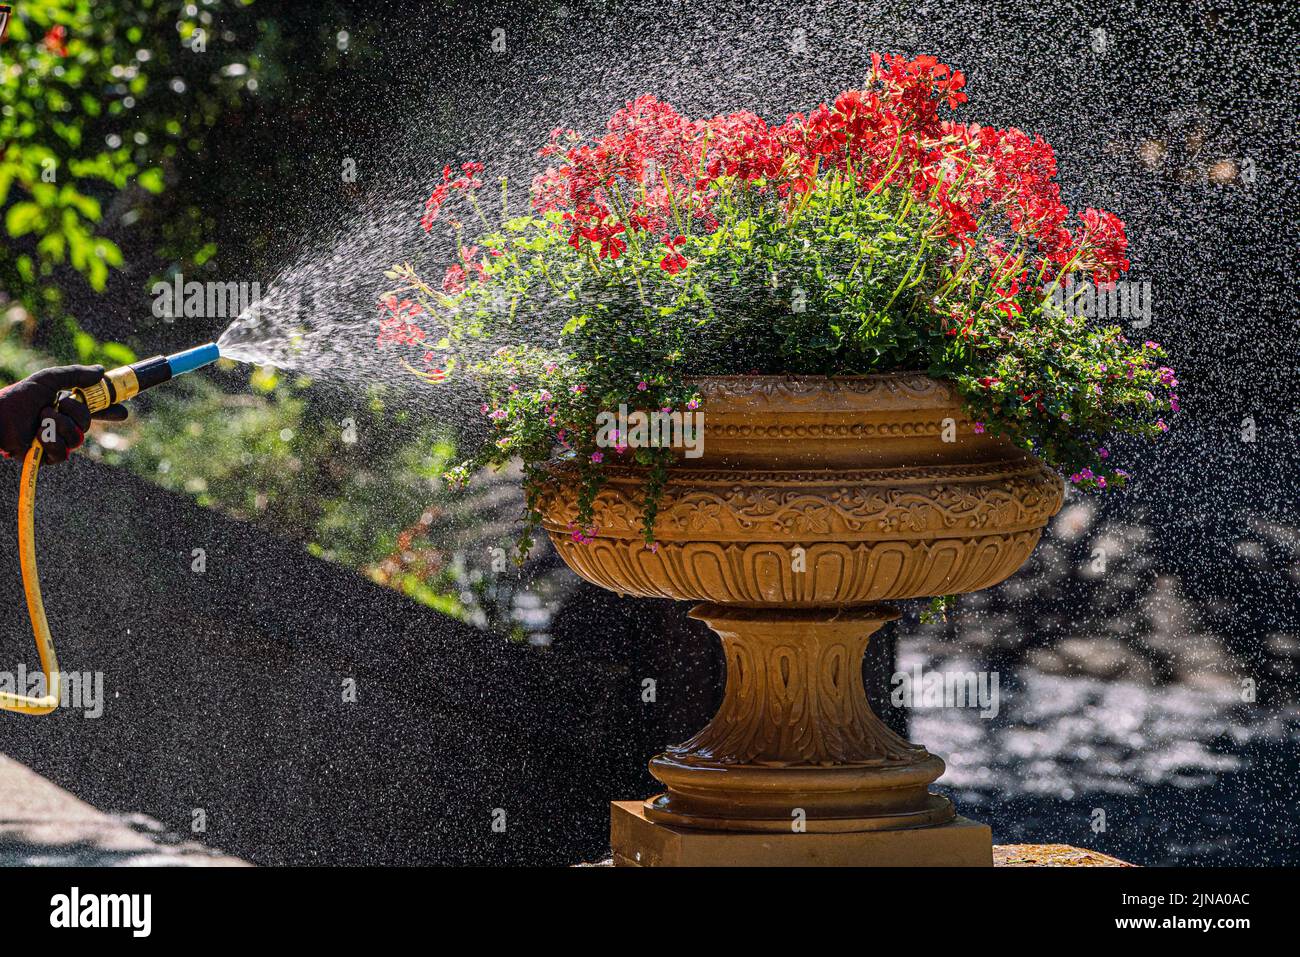 10 August 2022: Watering begonia plant with garden water hose nozzle, London, UK Stock Photo